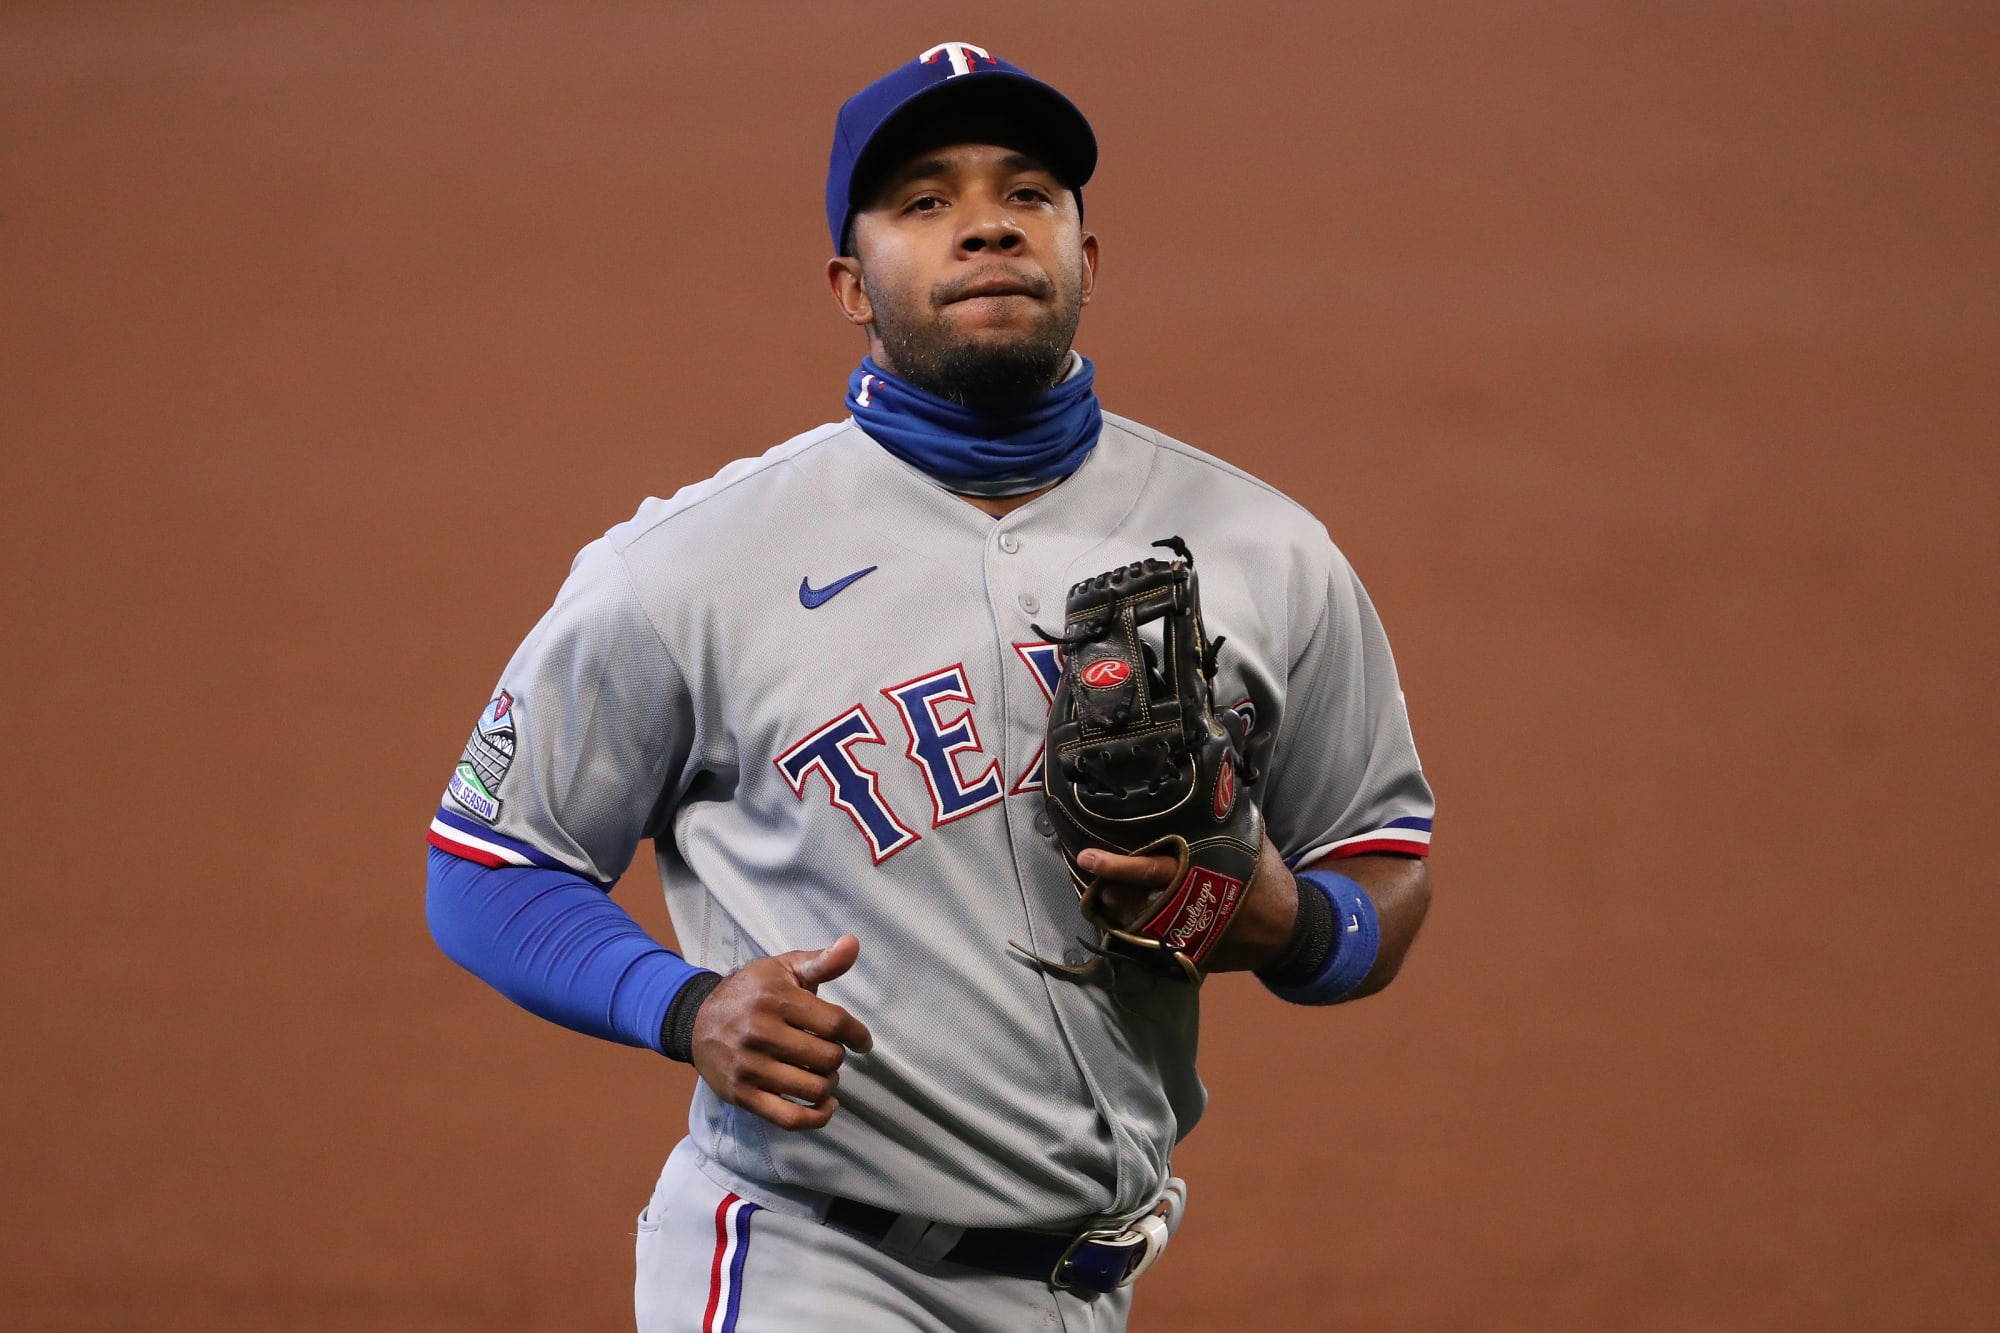 Texas Rangers Multiple players have cloudy futures with the Rangers